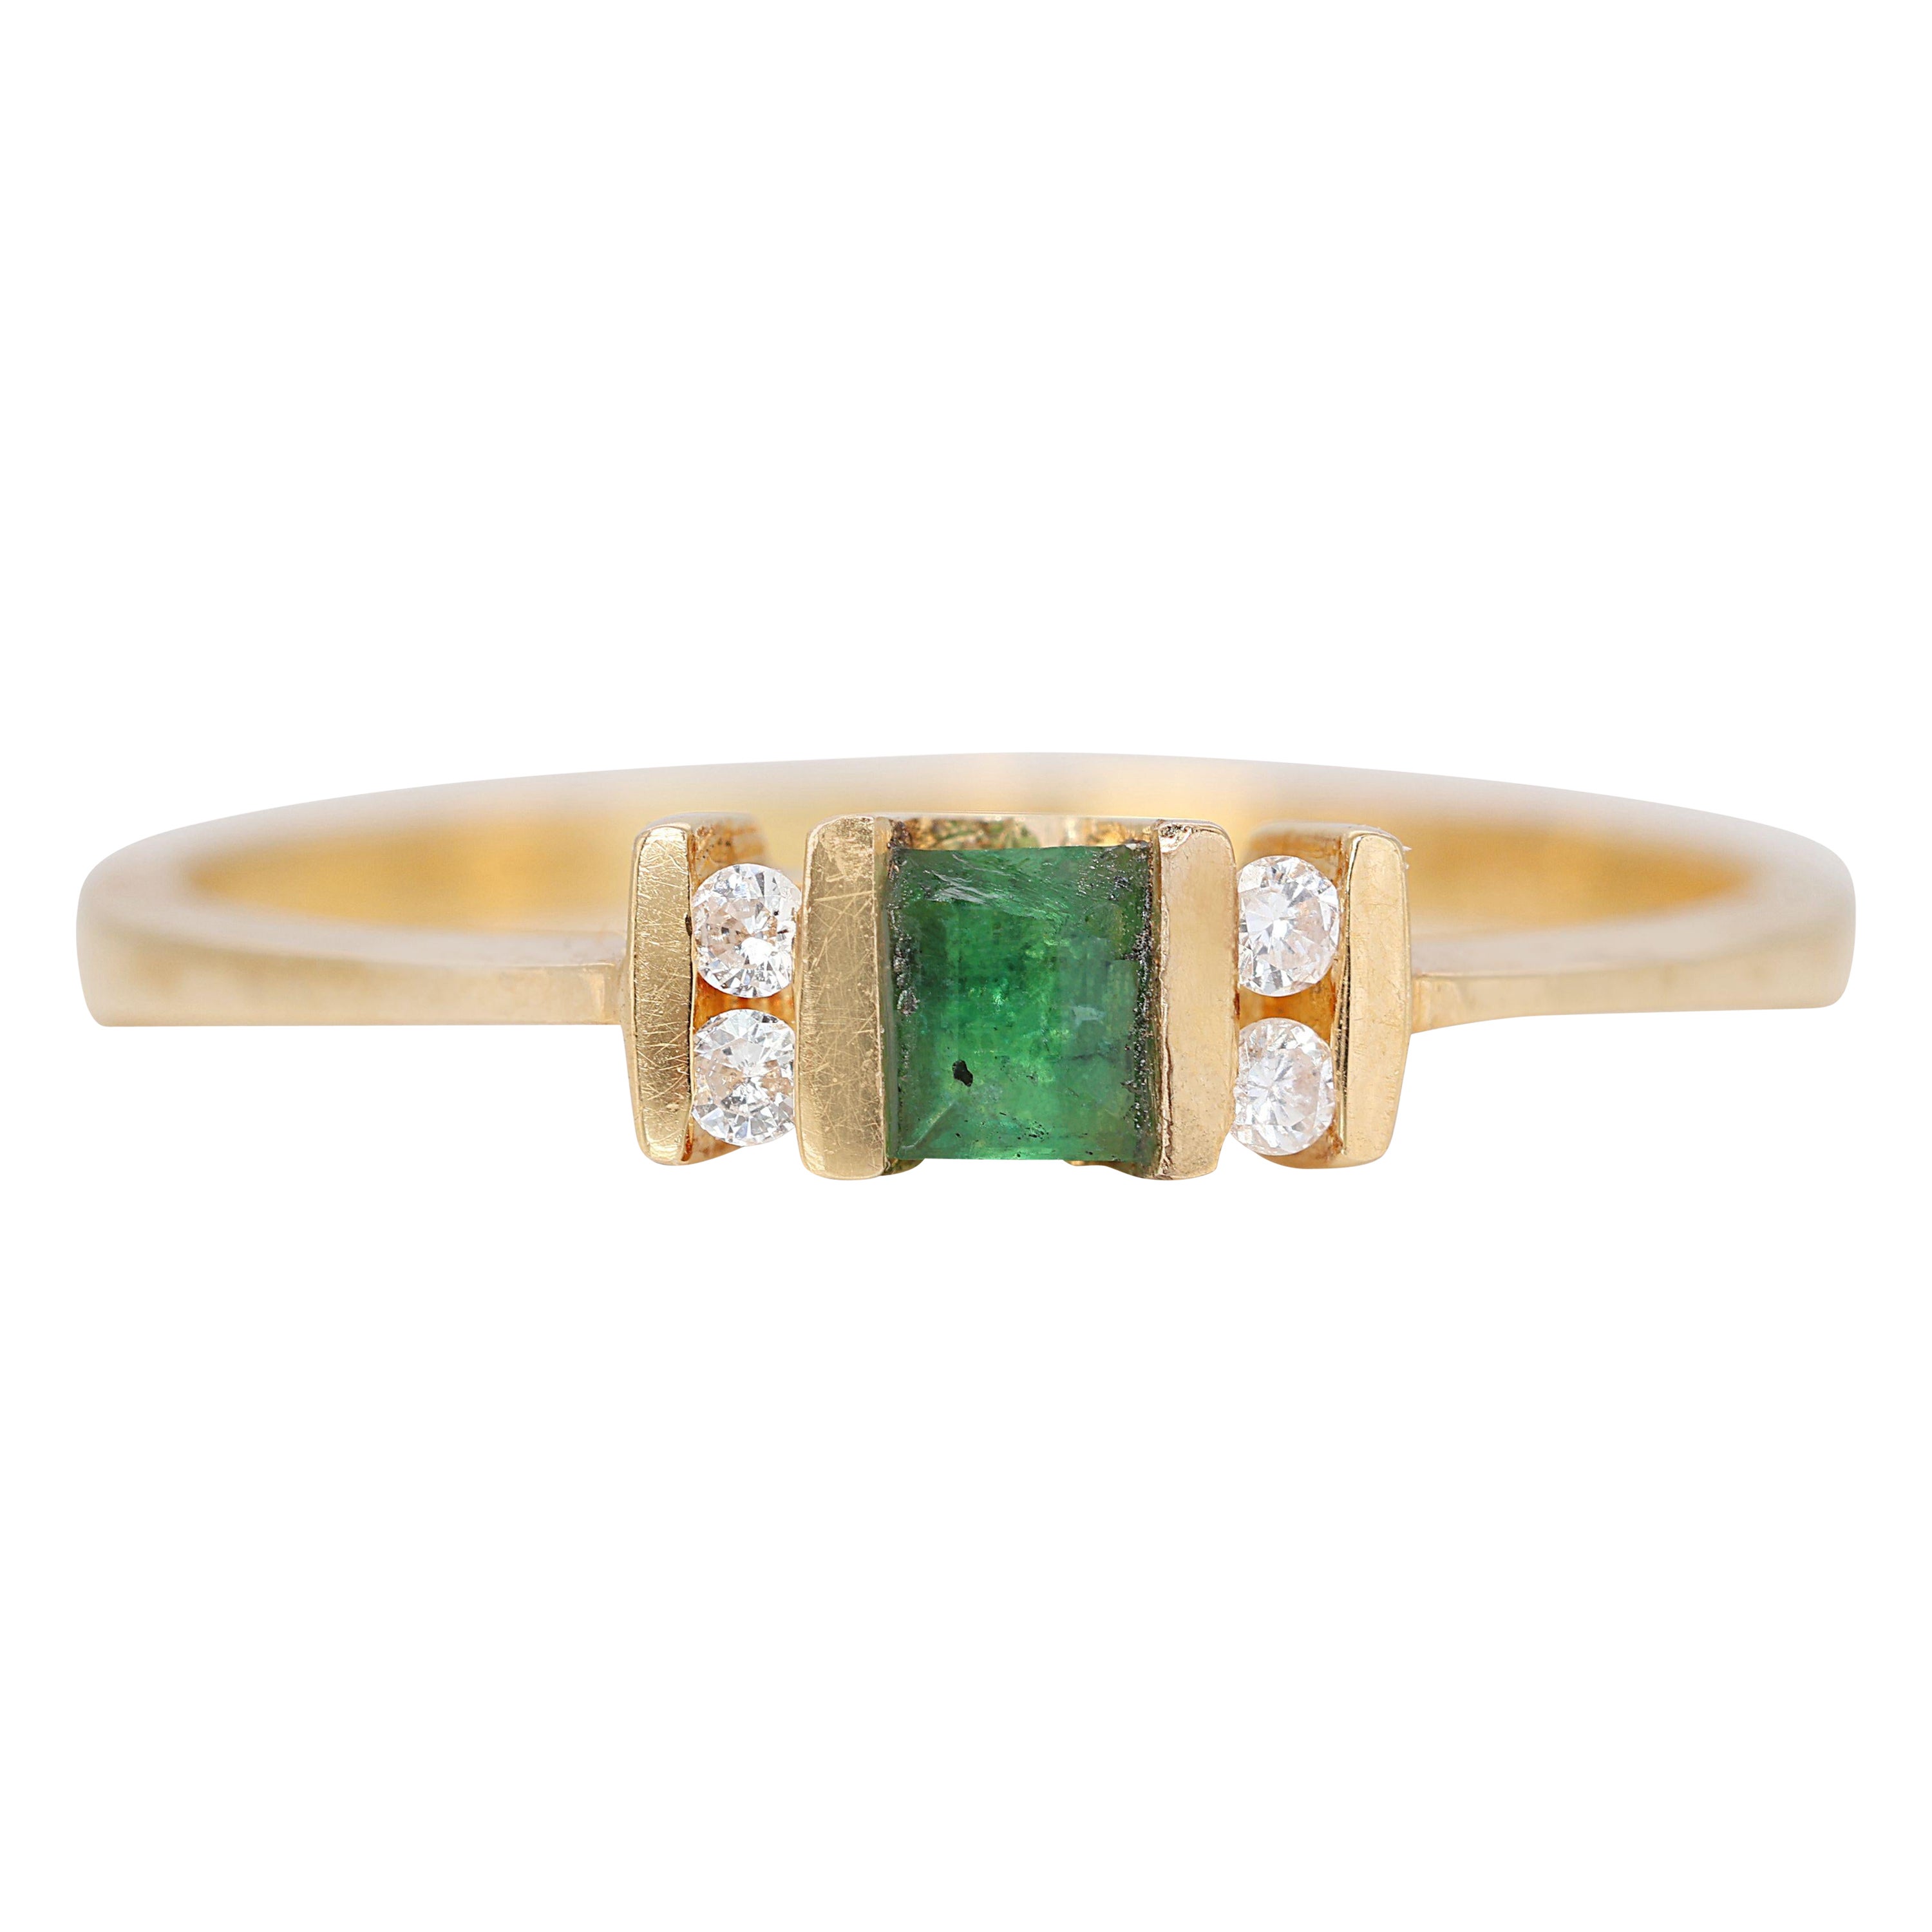 Exquisite 3-stone Emerald Diamond Ring in 18K Yellow Gold For Sale